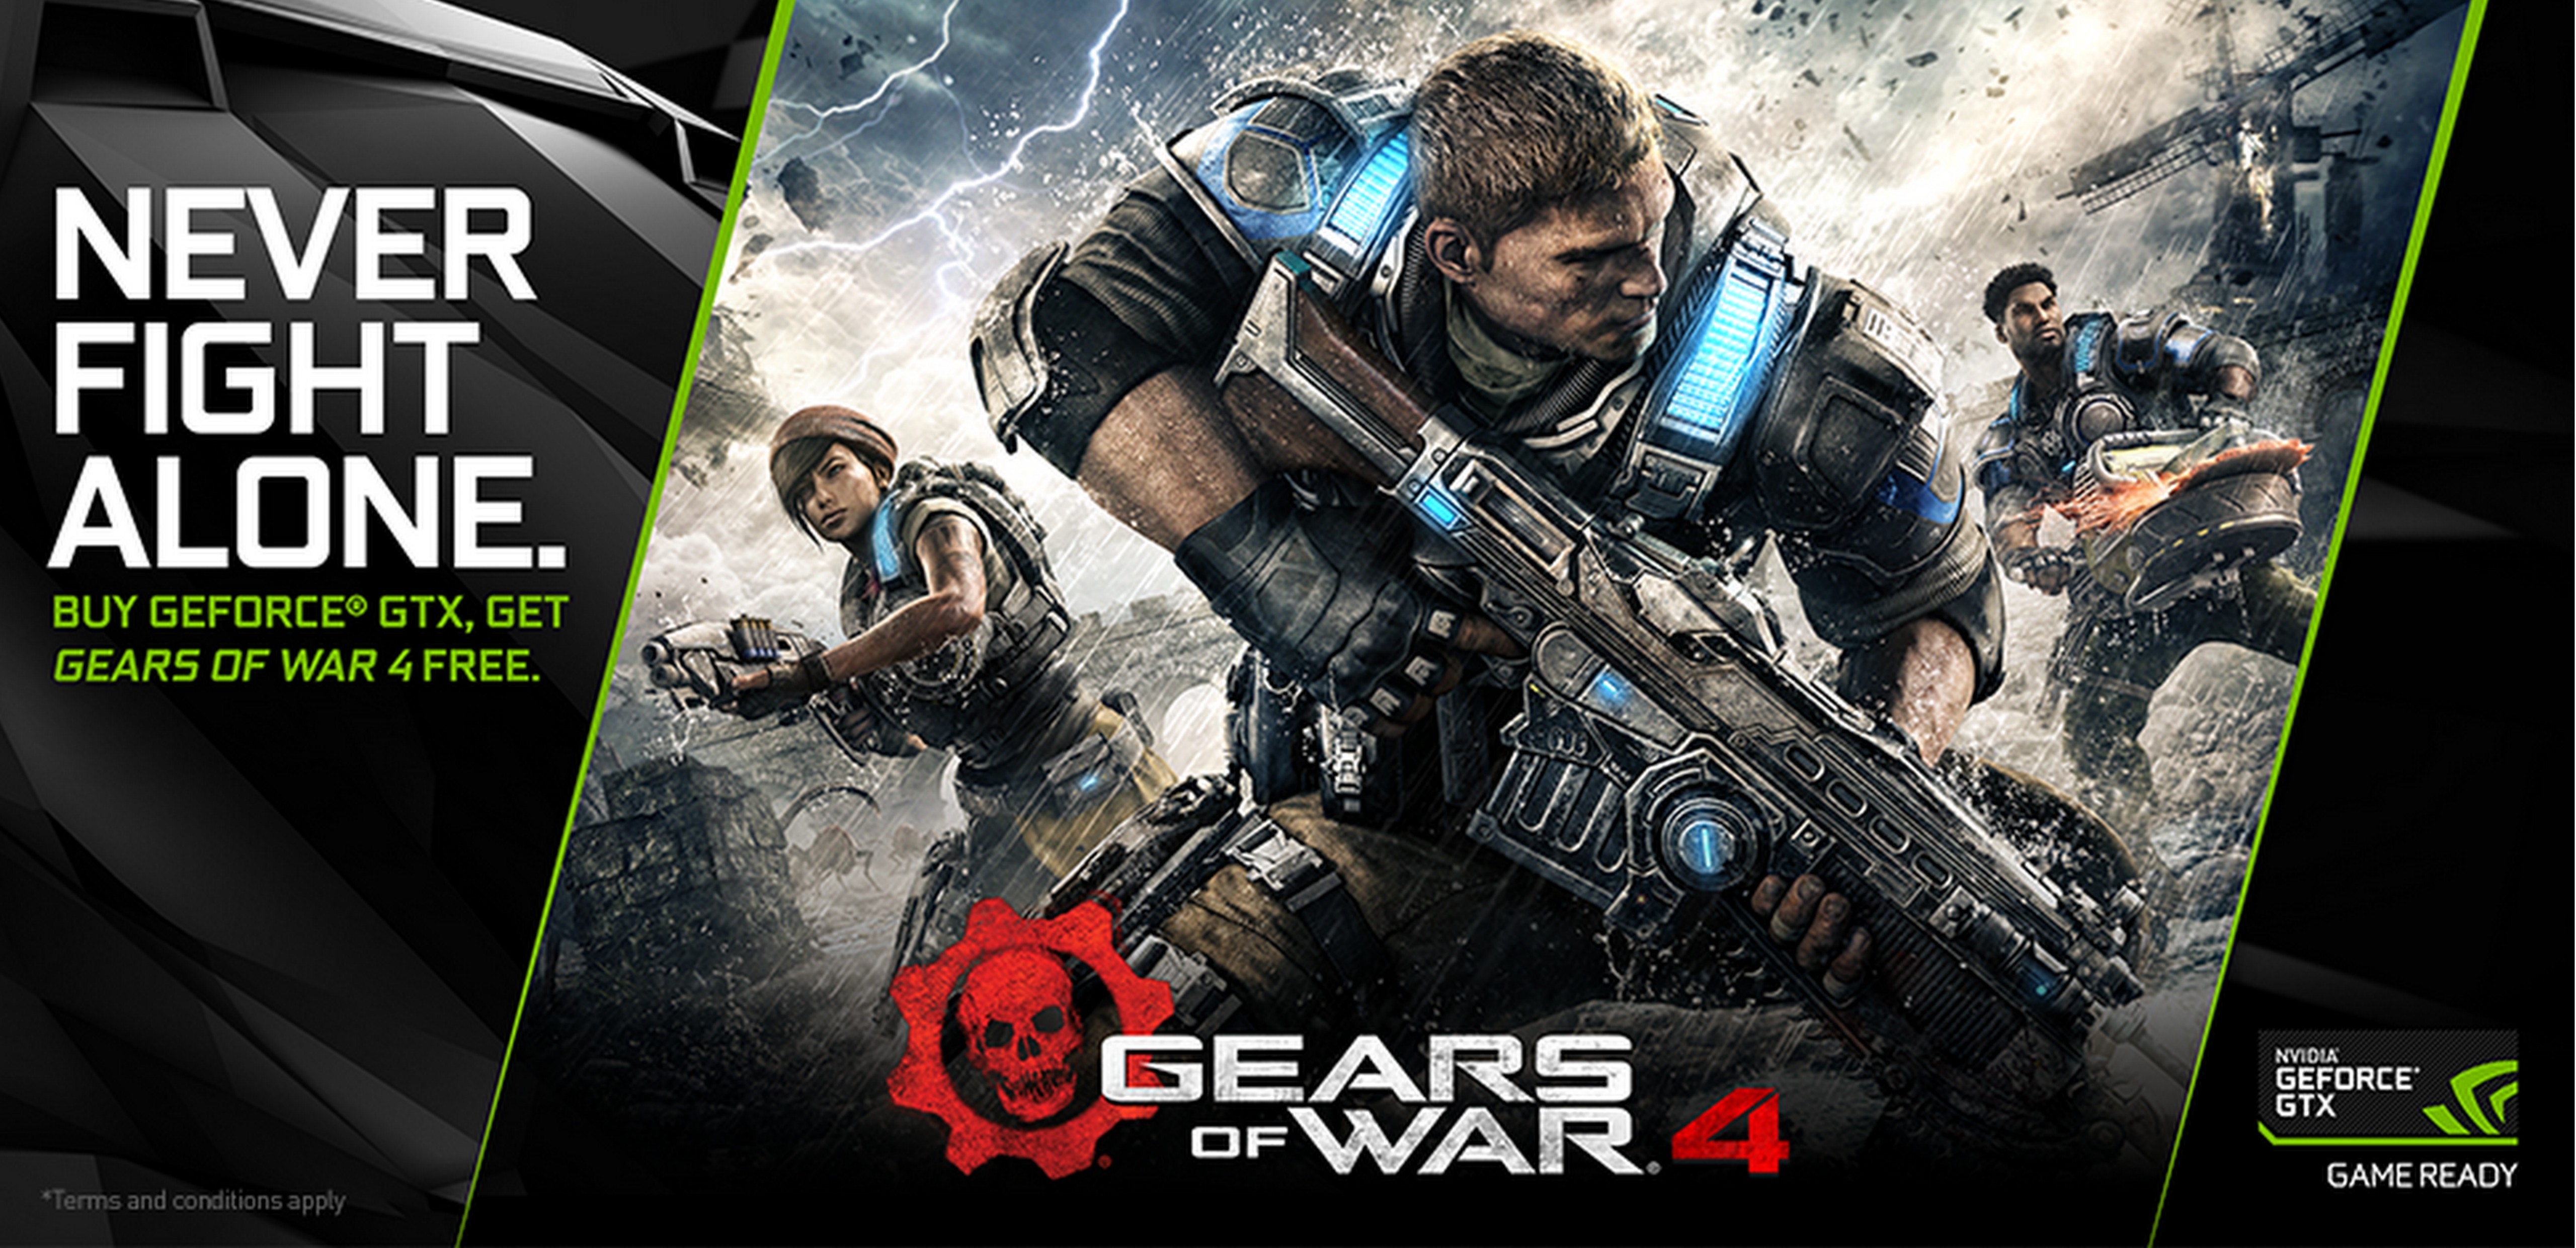 Gears of war pc digital download lets cook with nora pdf free download